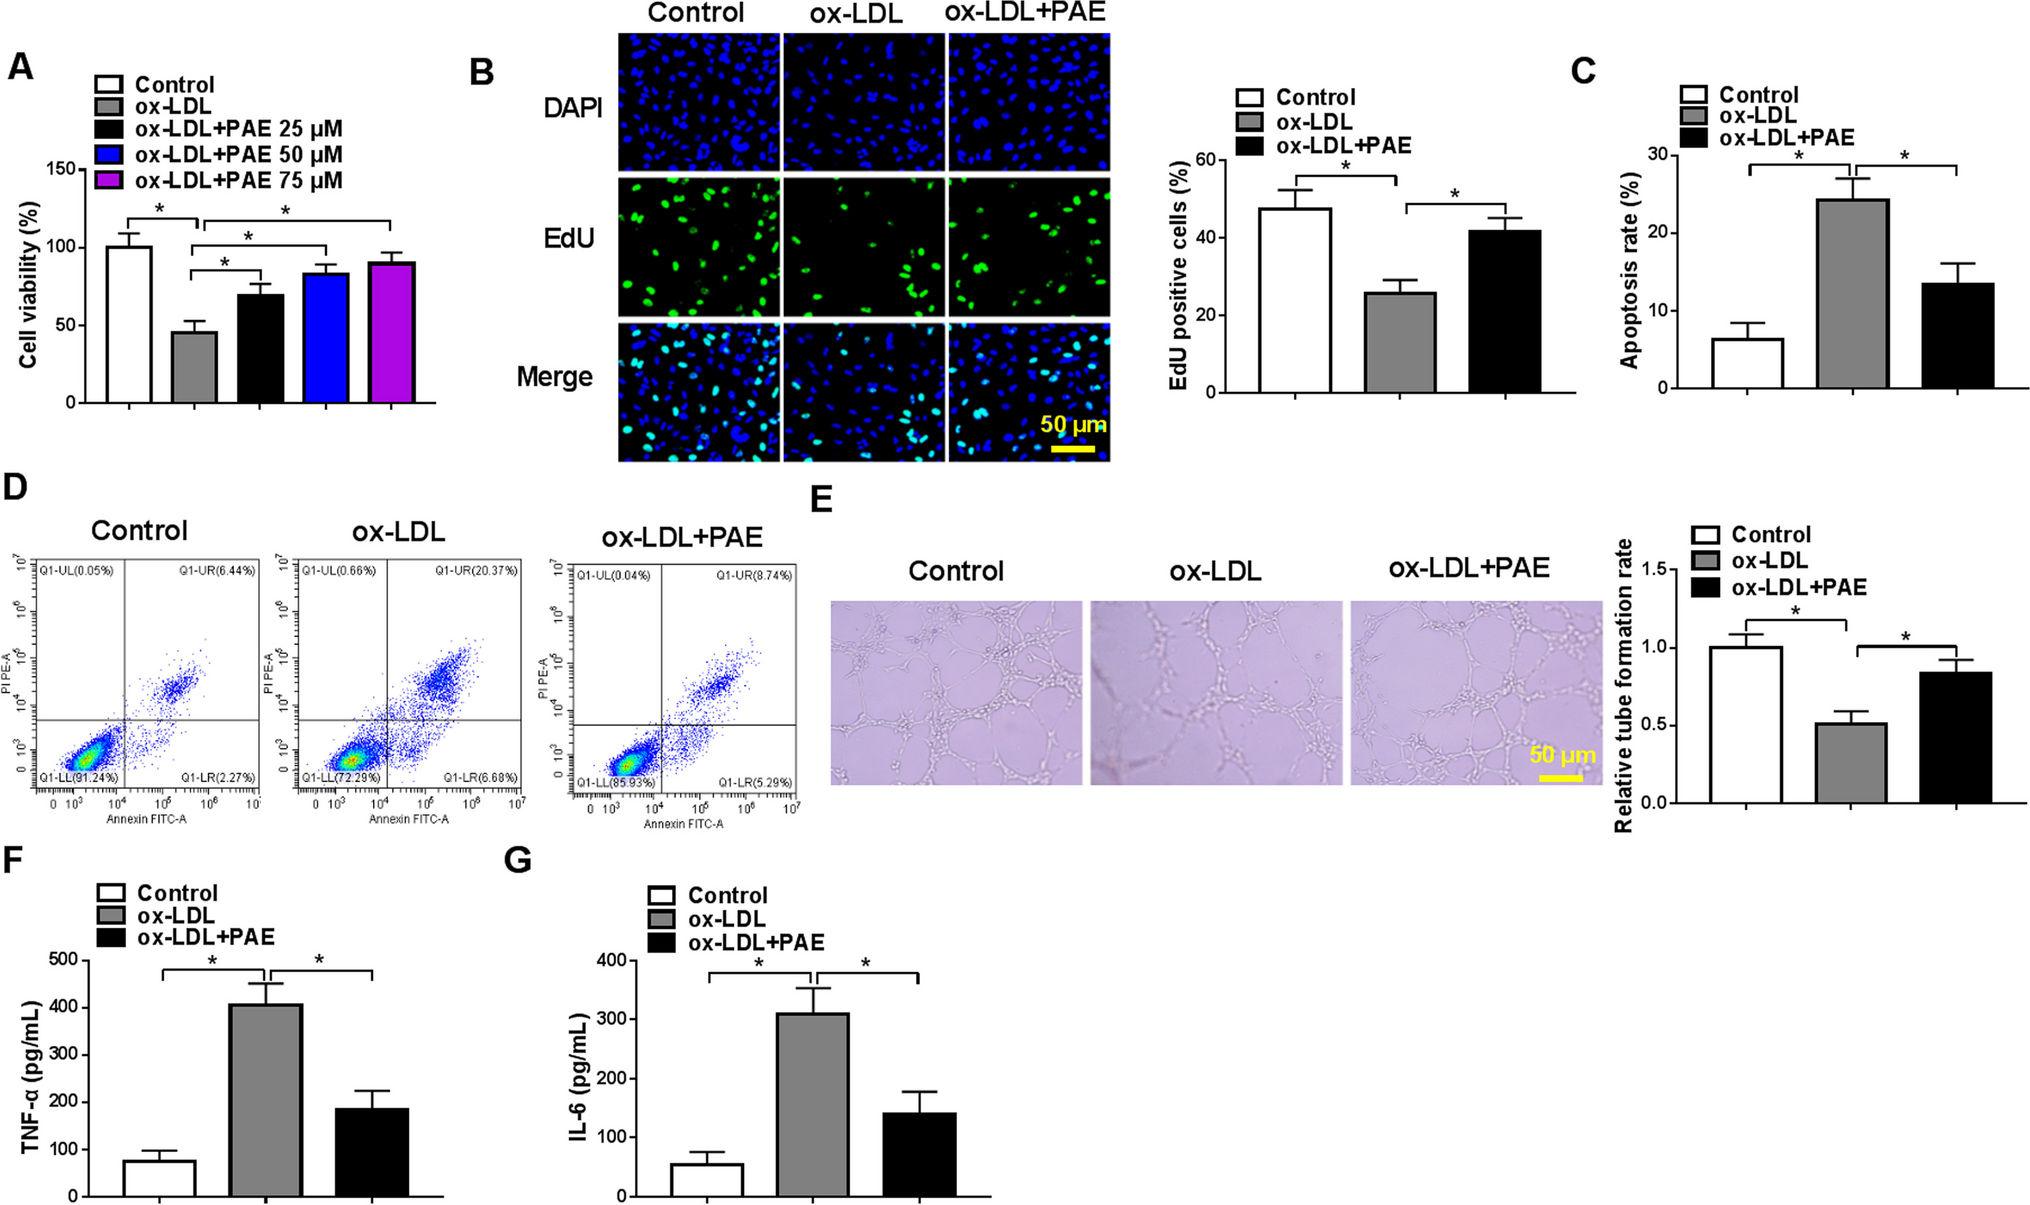 Paeonol alleviates ox-LDL-induced endothelial cell injury by targeting the heme oxygenase-1/phosphoinositide 3-kinase/protein kinase B pathway